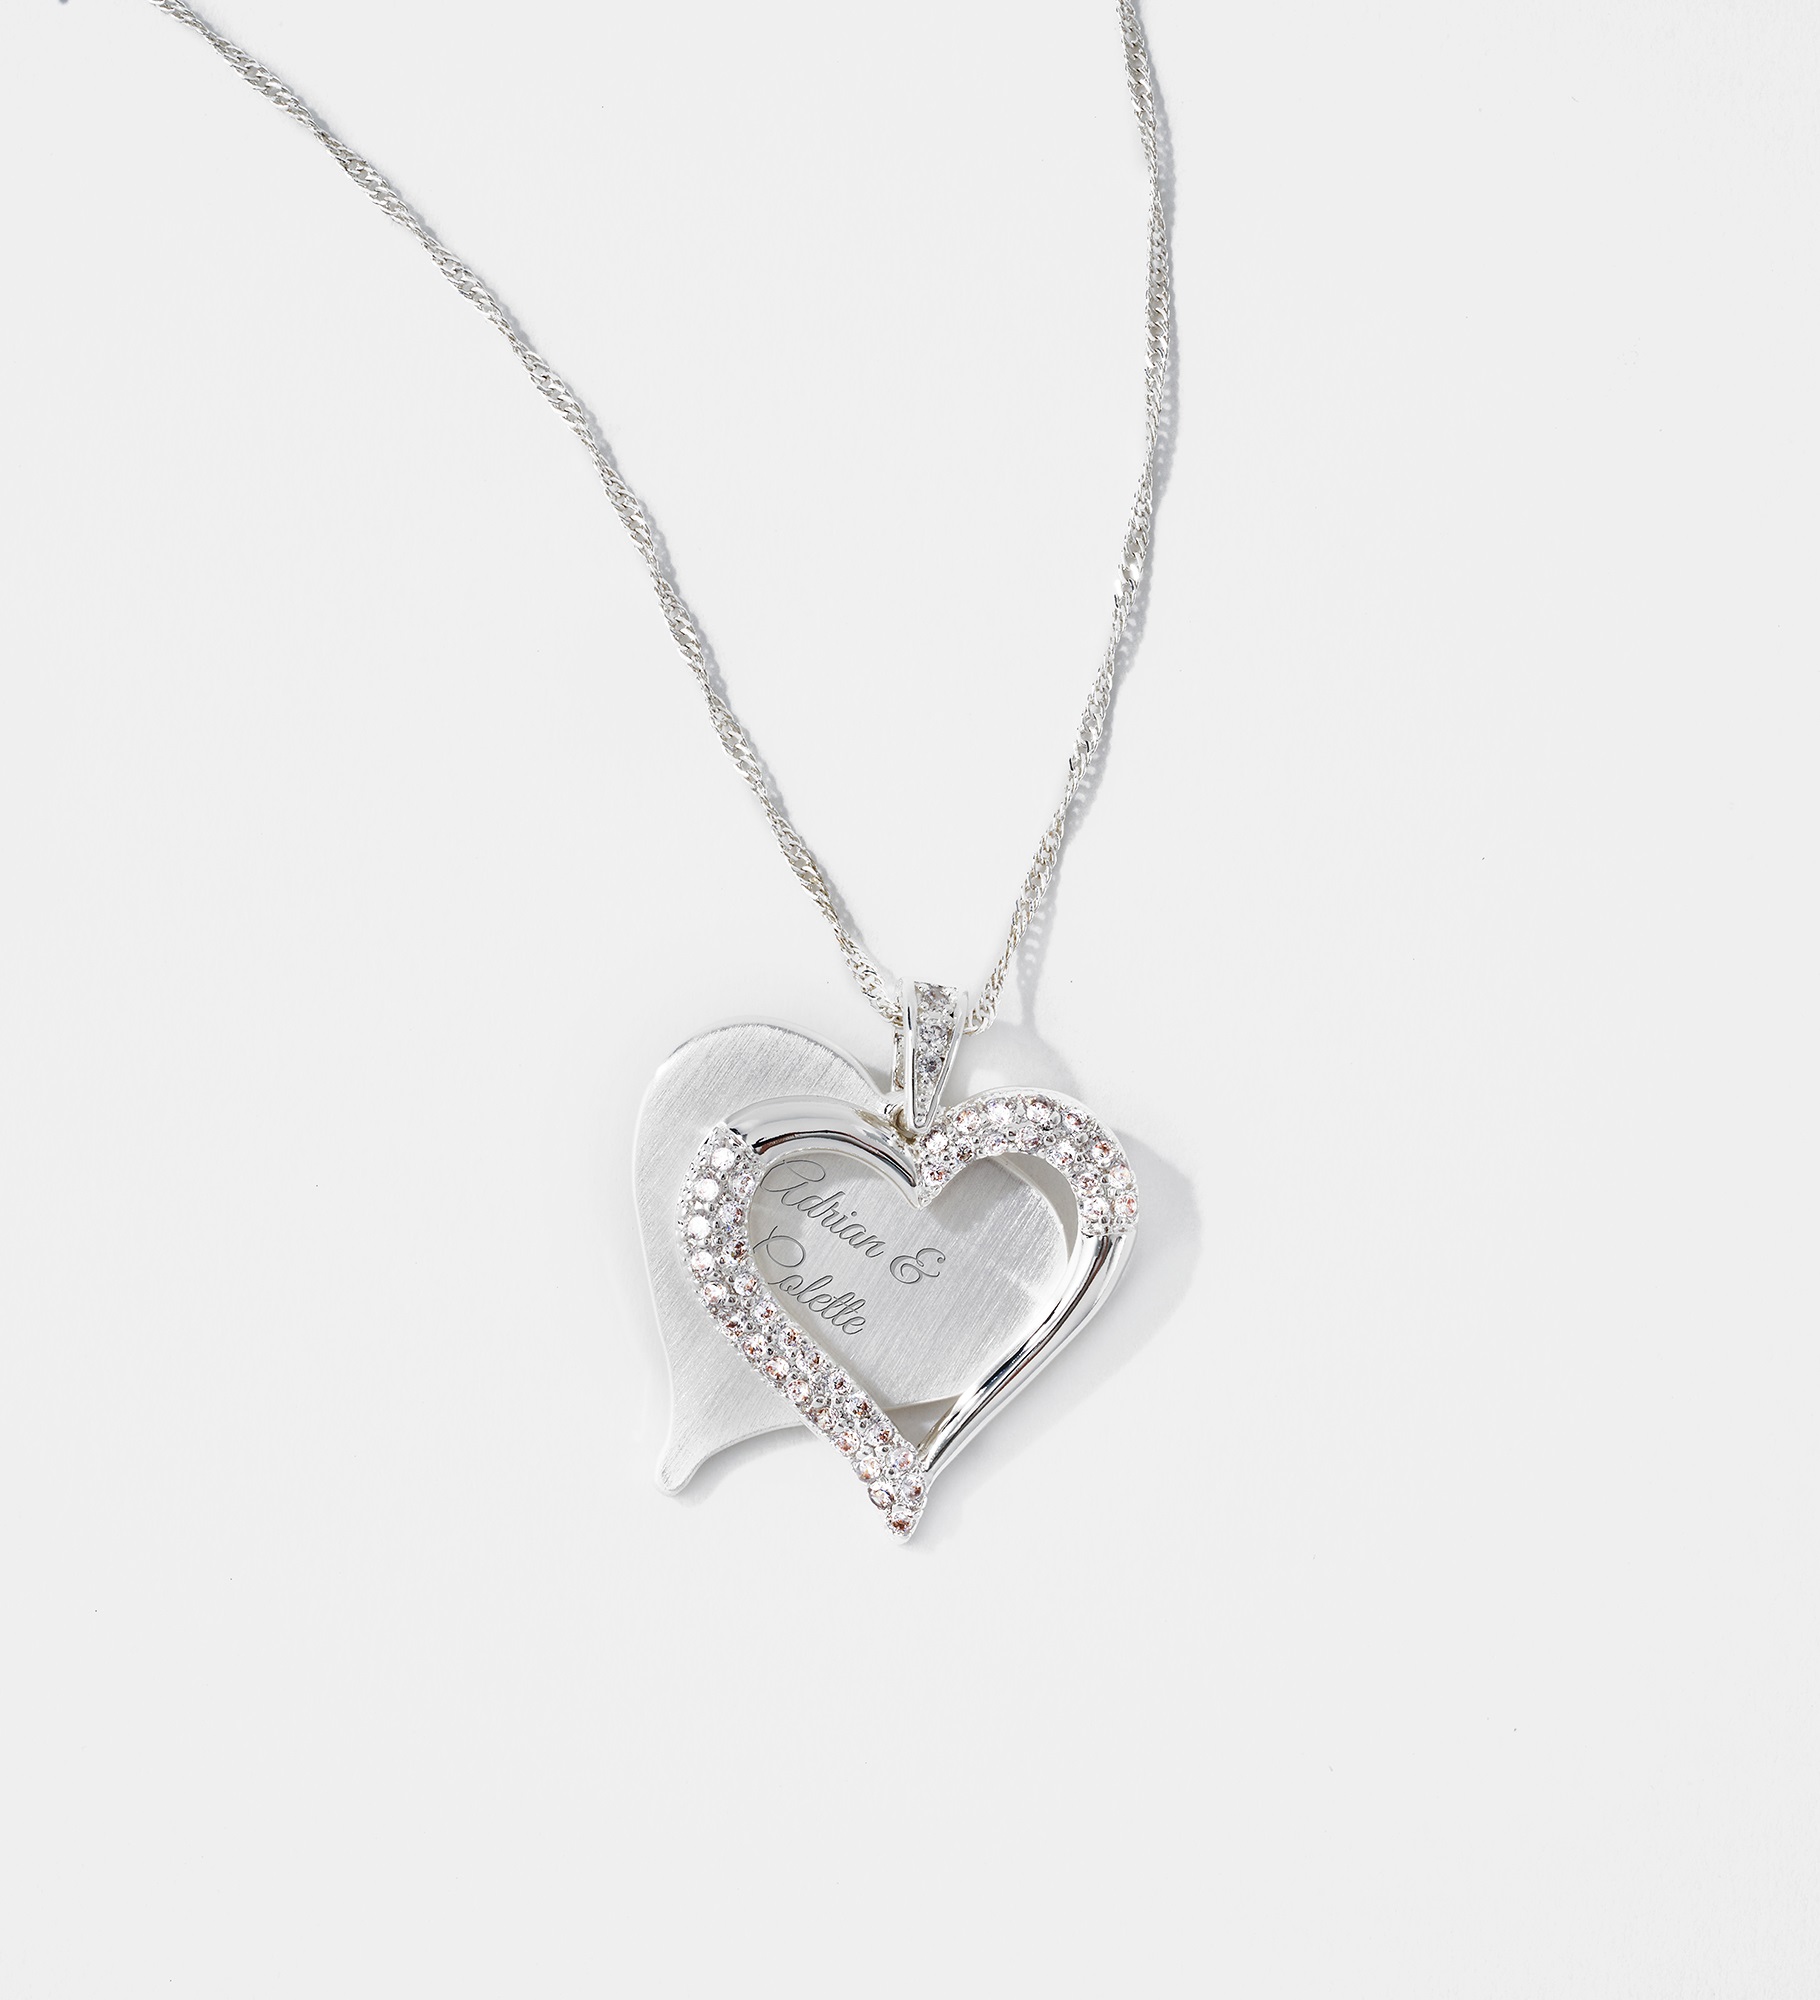 Engraved Silver Plated Brushed Heart Swing Necklace